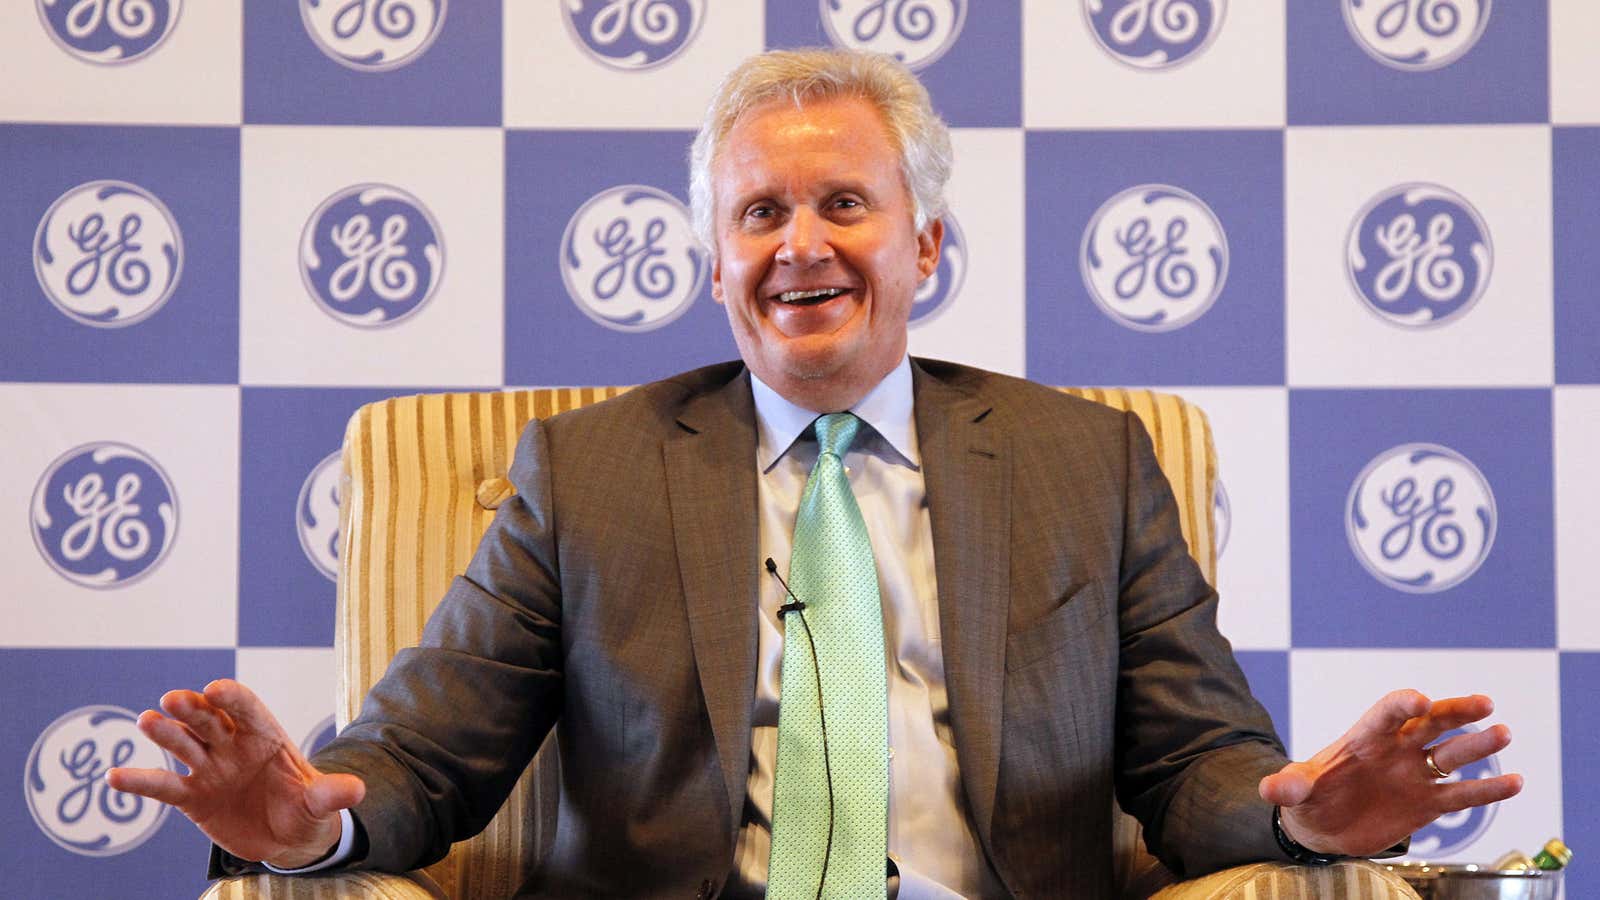 Under CEO Jeff Immelt, GE is investing in big data and 3D printing.